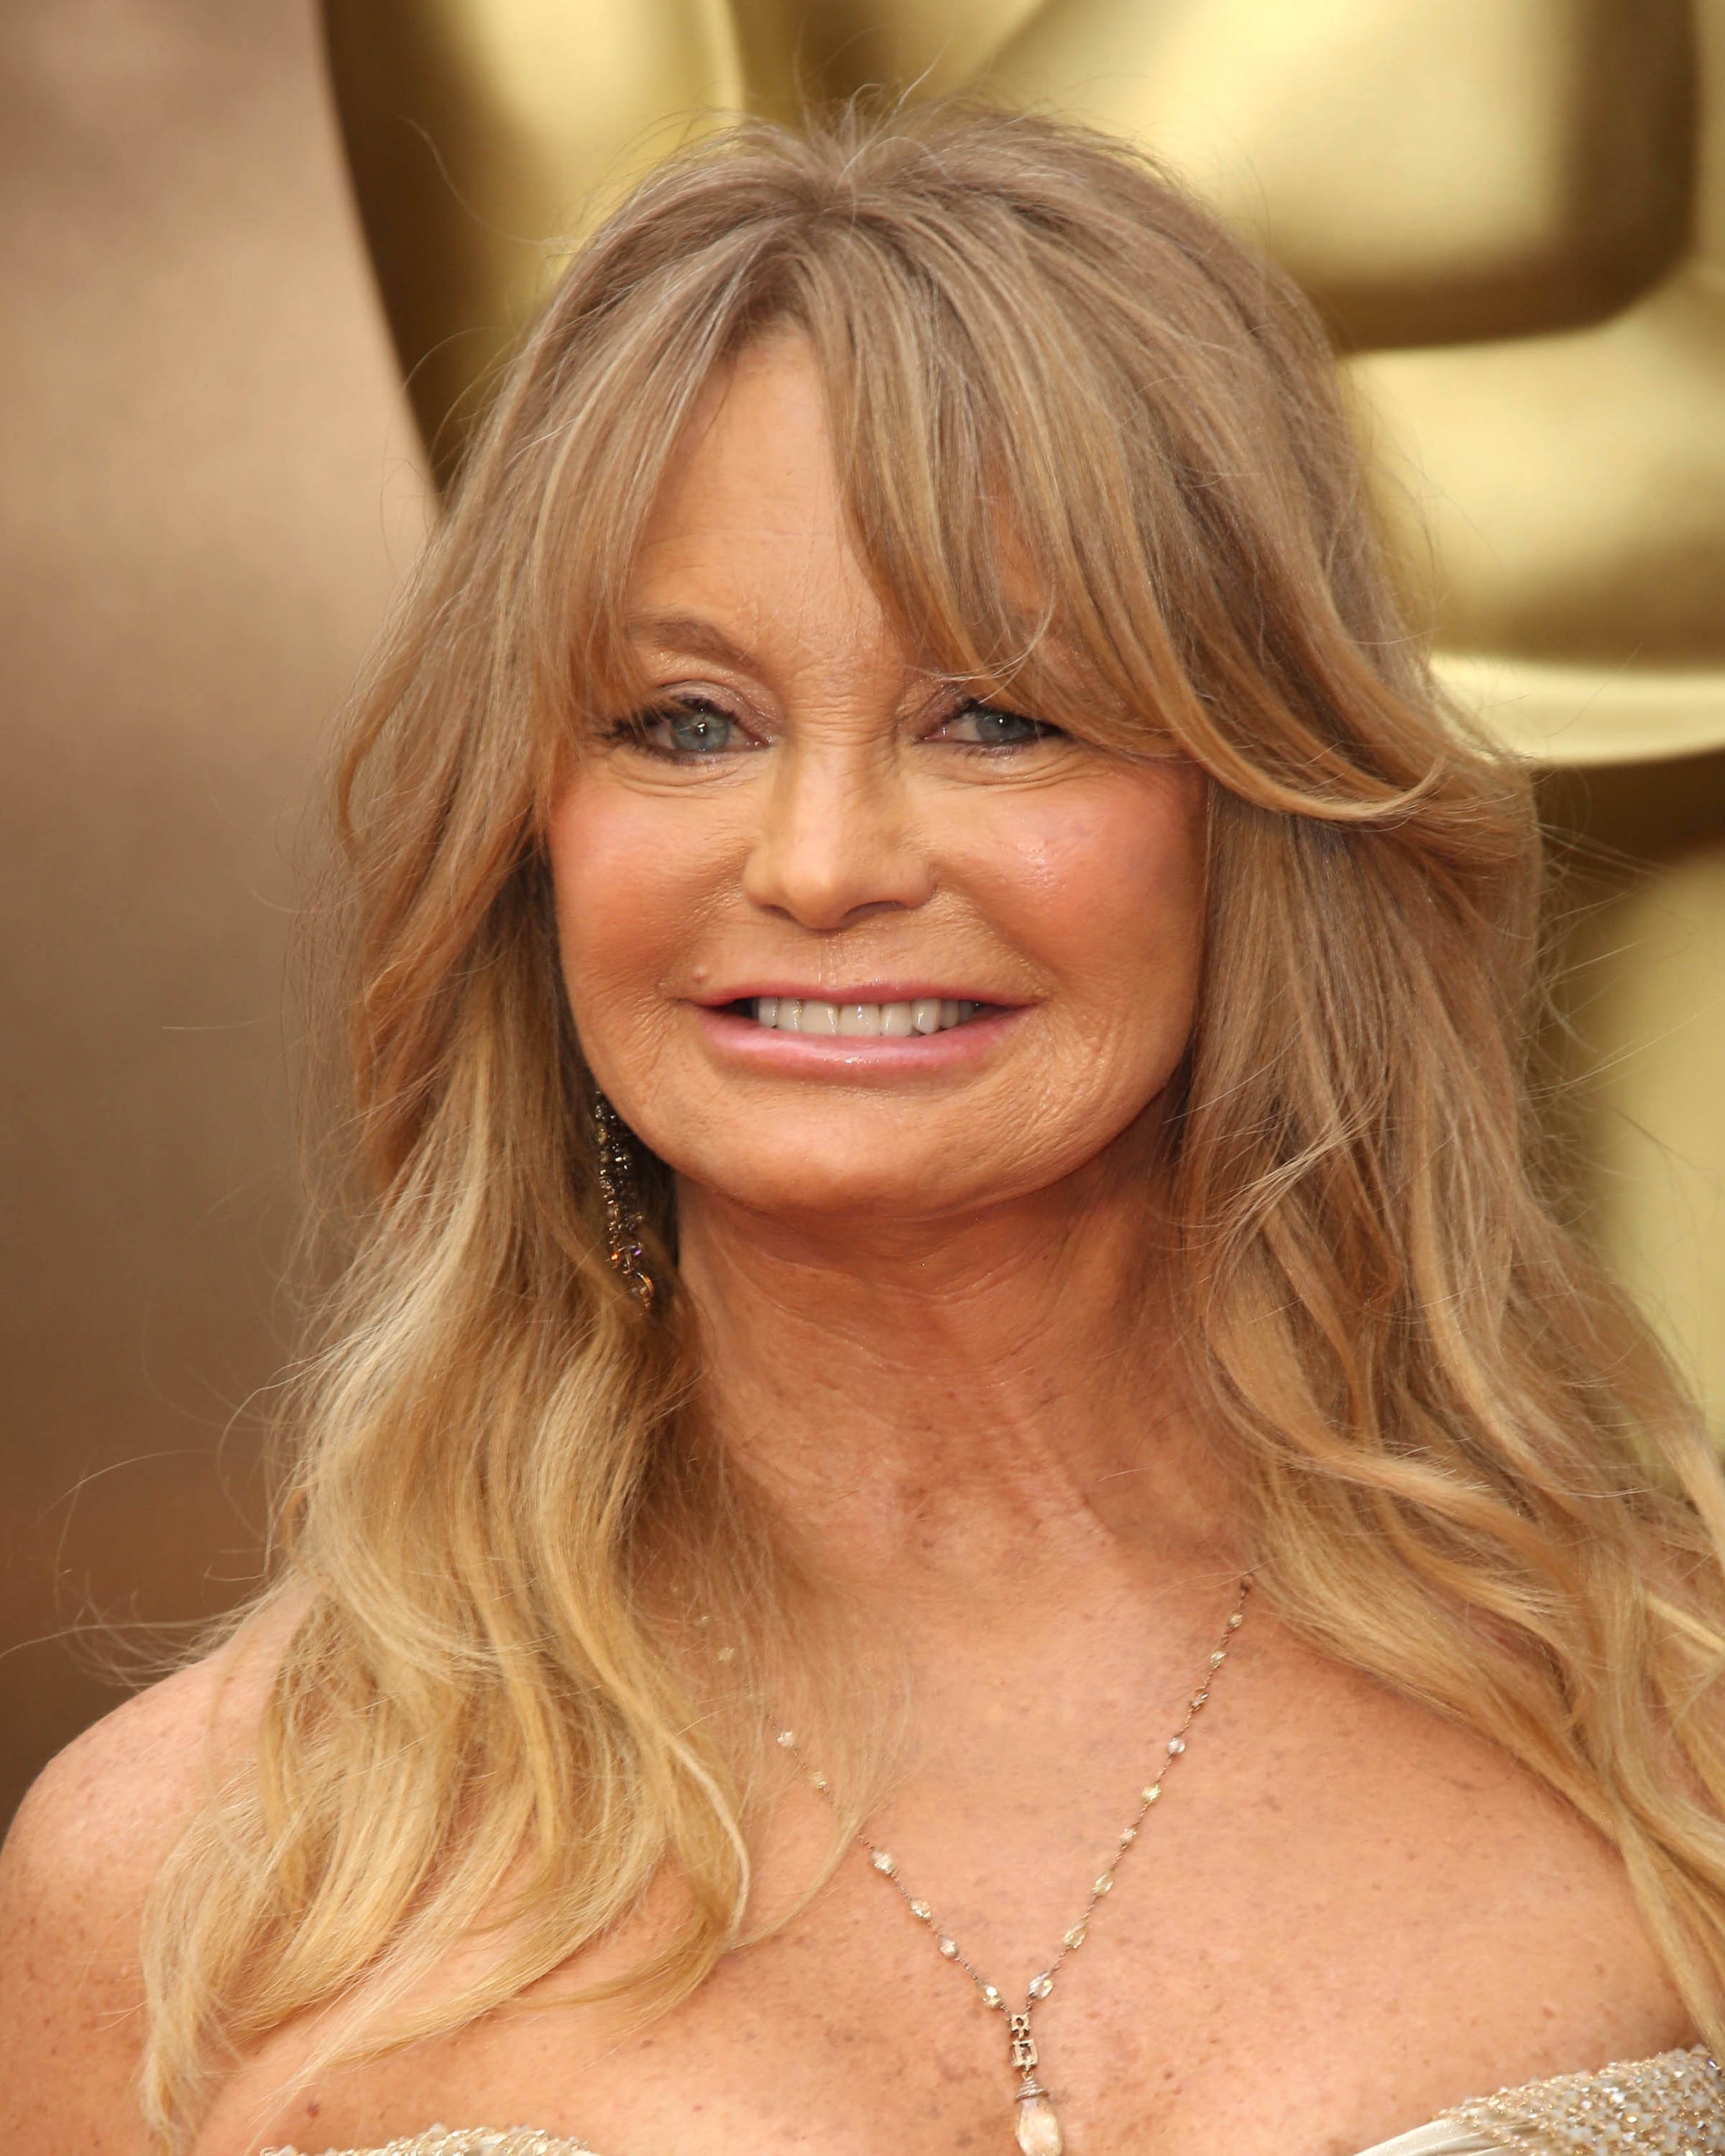 <p>Goldie Hawn's cheekbones appeared especially full when she attended the 2014 Academy Awards. Do you think she went under the knife? The iconic actress has neither confirmed nor denied the plastic surgery rumors.</p>